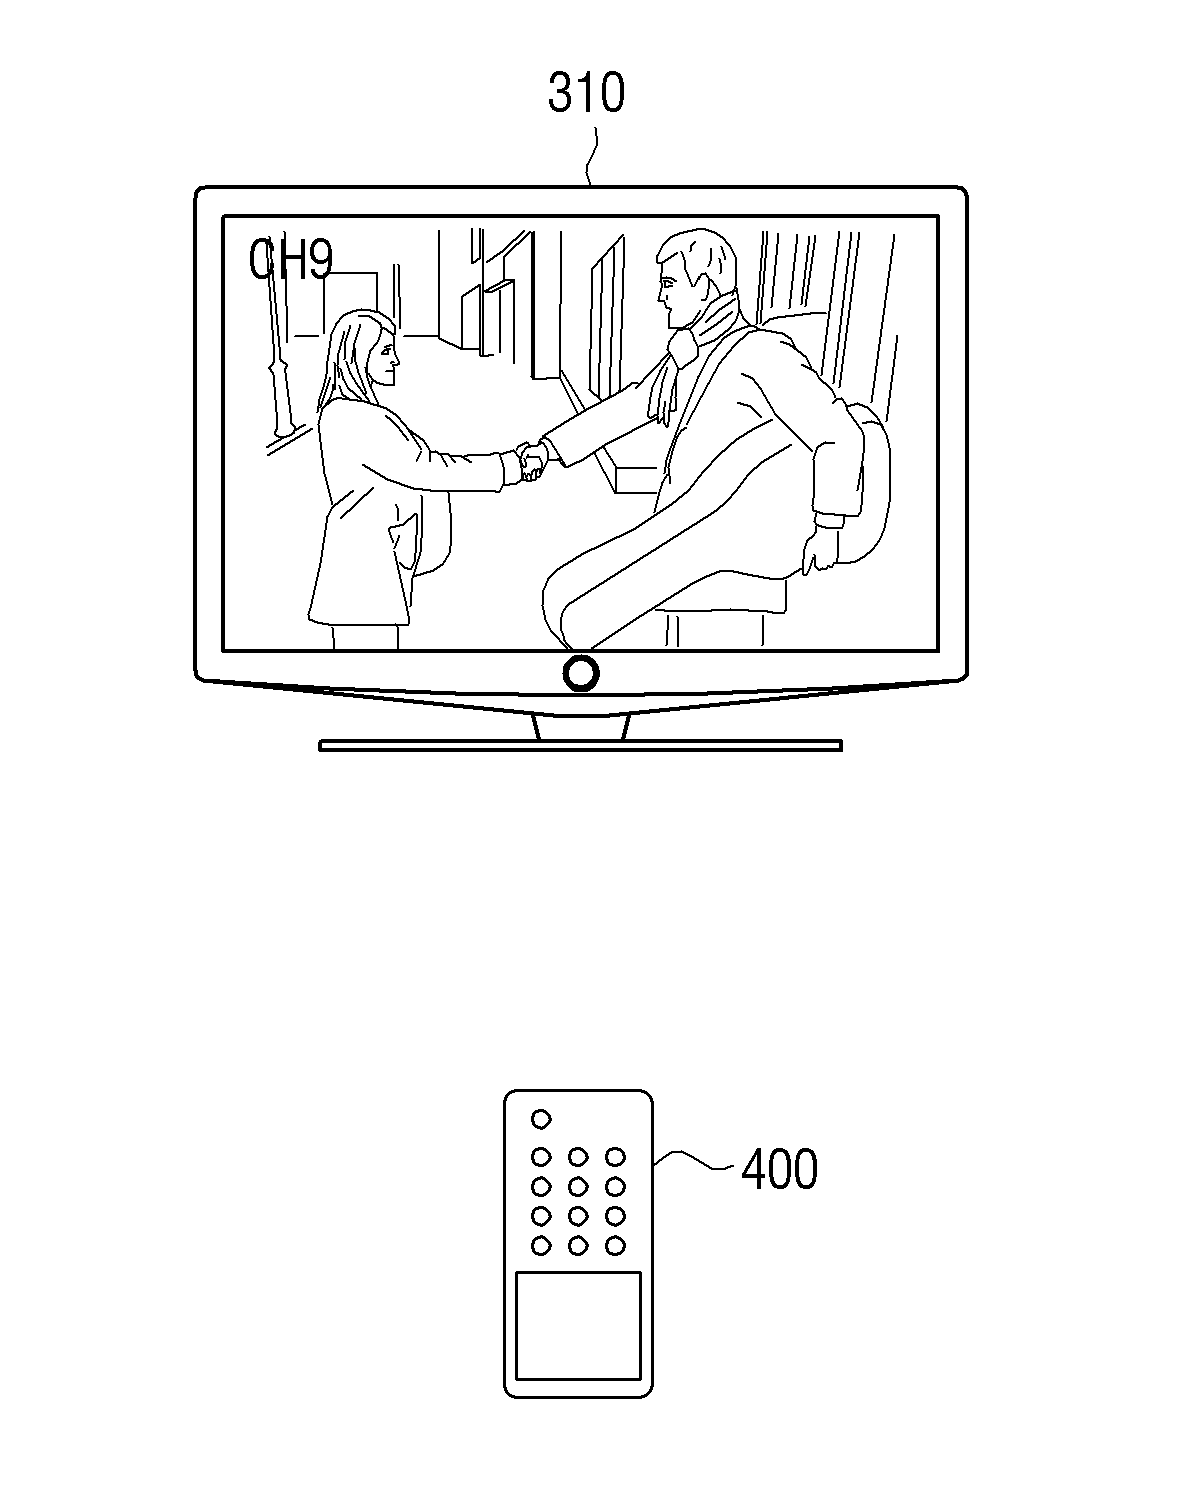 Remote controller apparatus, broadcast receiving apparatus and method for controlling the same